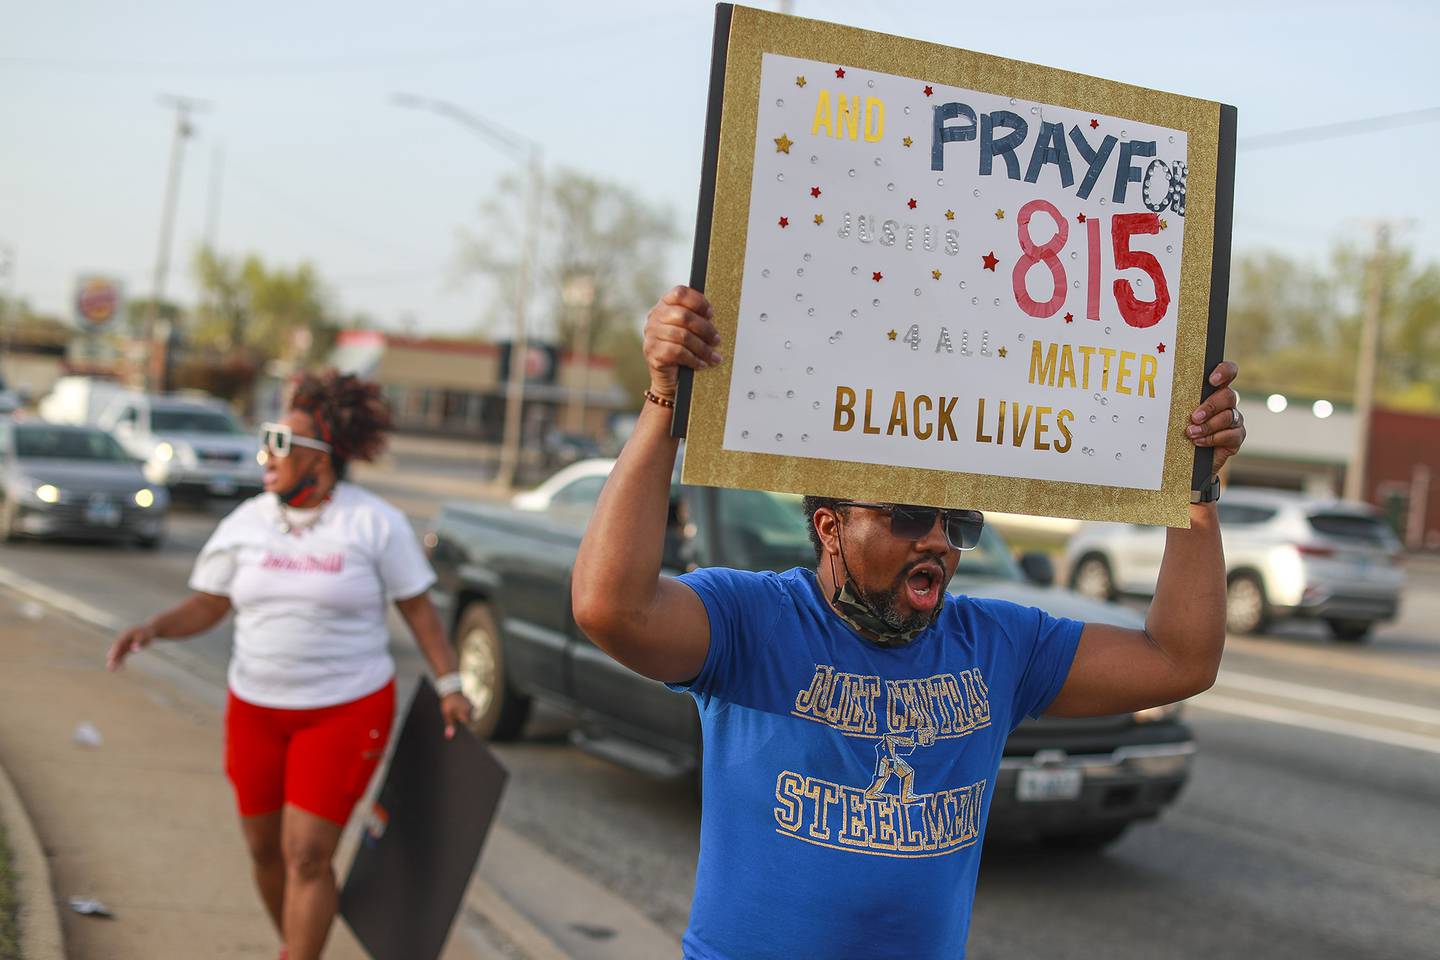 Bernell Simmons of the organization AndJustUsForAll calls for justice for Eric Lurry, a Joliet man who died of an overdose in police custody, on Tuesday, April 27, 2021, at the corner of Larkin Ave. and Jefferson st. in Joliet, Ill.